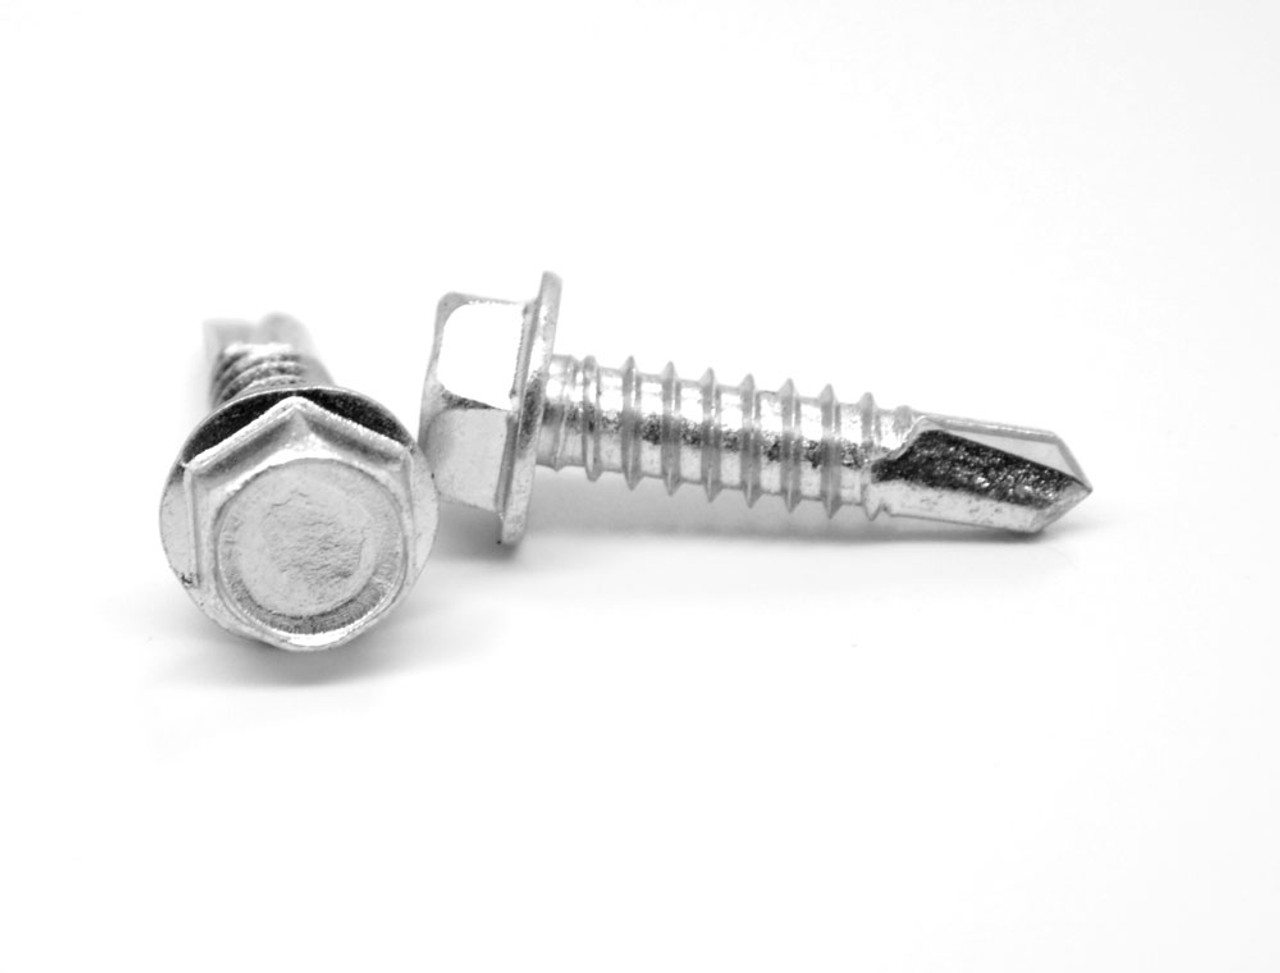 1/4-20 x 1 1/2 Coarse Thread Self Drilling Screw Hex Washer Head #3 Point Low Carbon Steel Zinc Plated